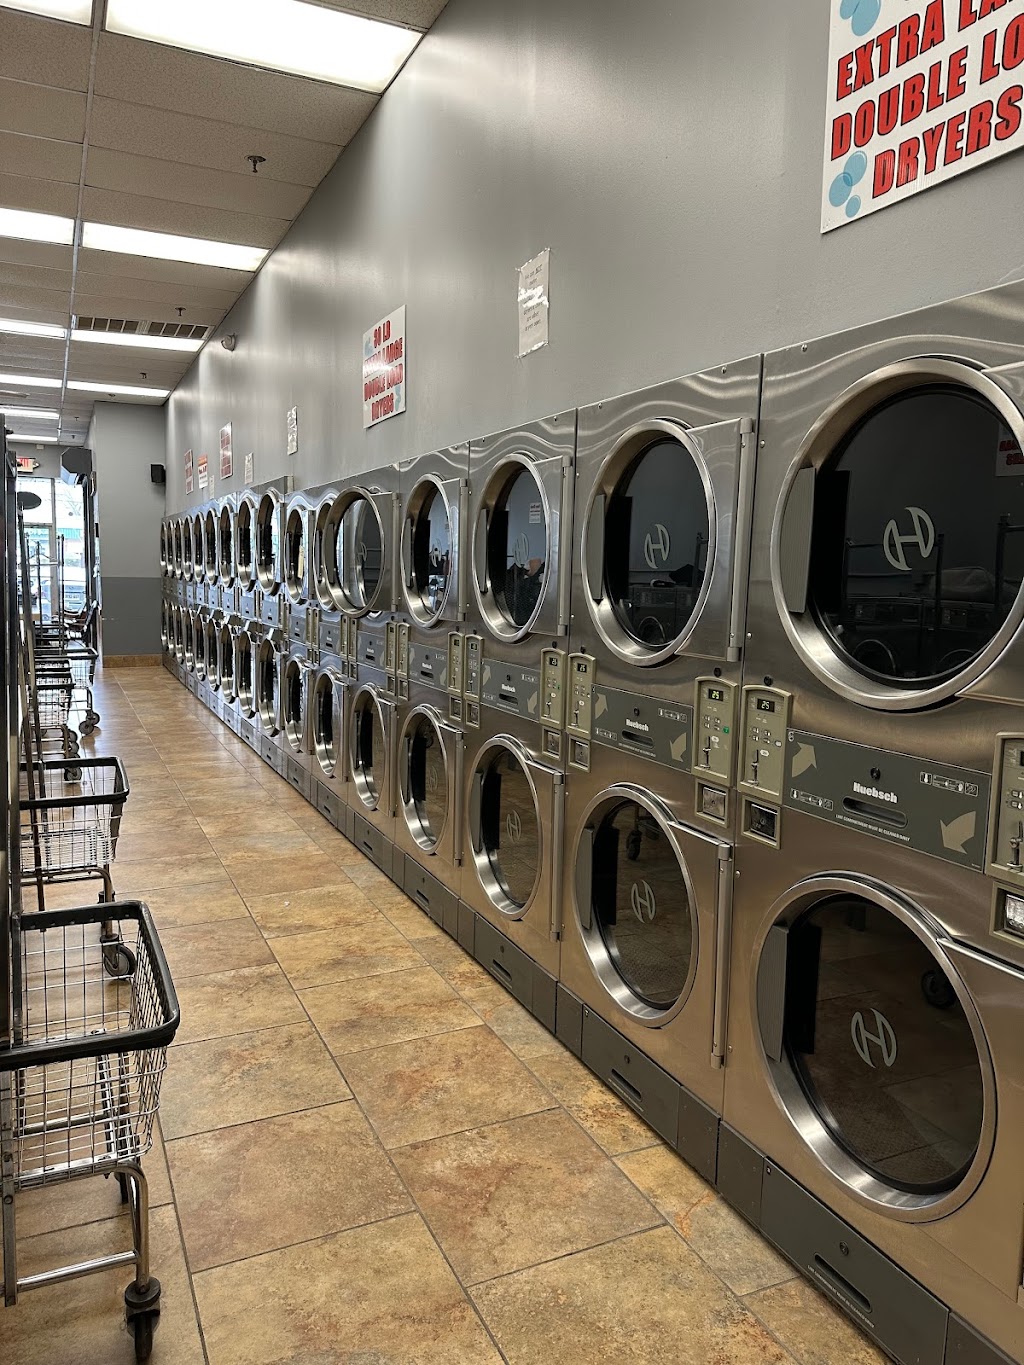 Washing Board Laundromat | 52 N Middletown Rd, Pearl River, NY 10965 | Phone: (845) 735-9246